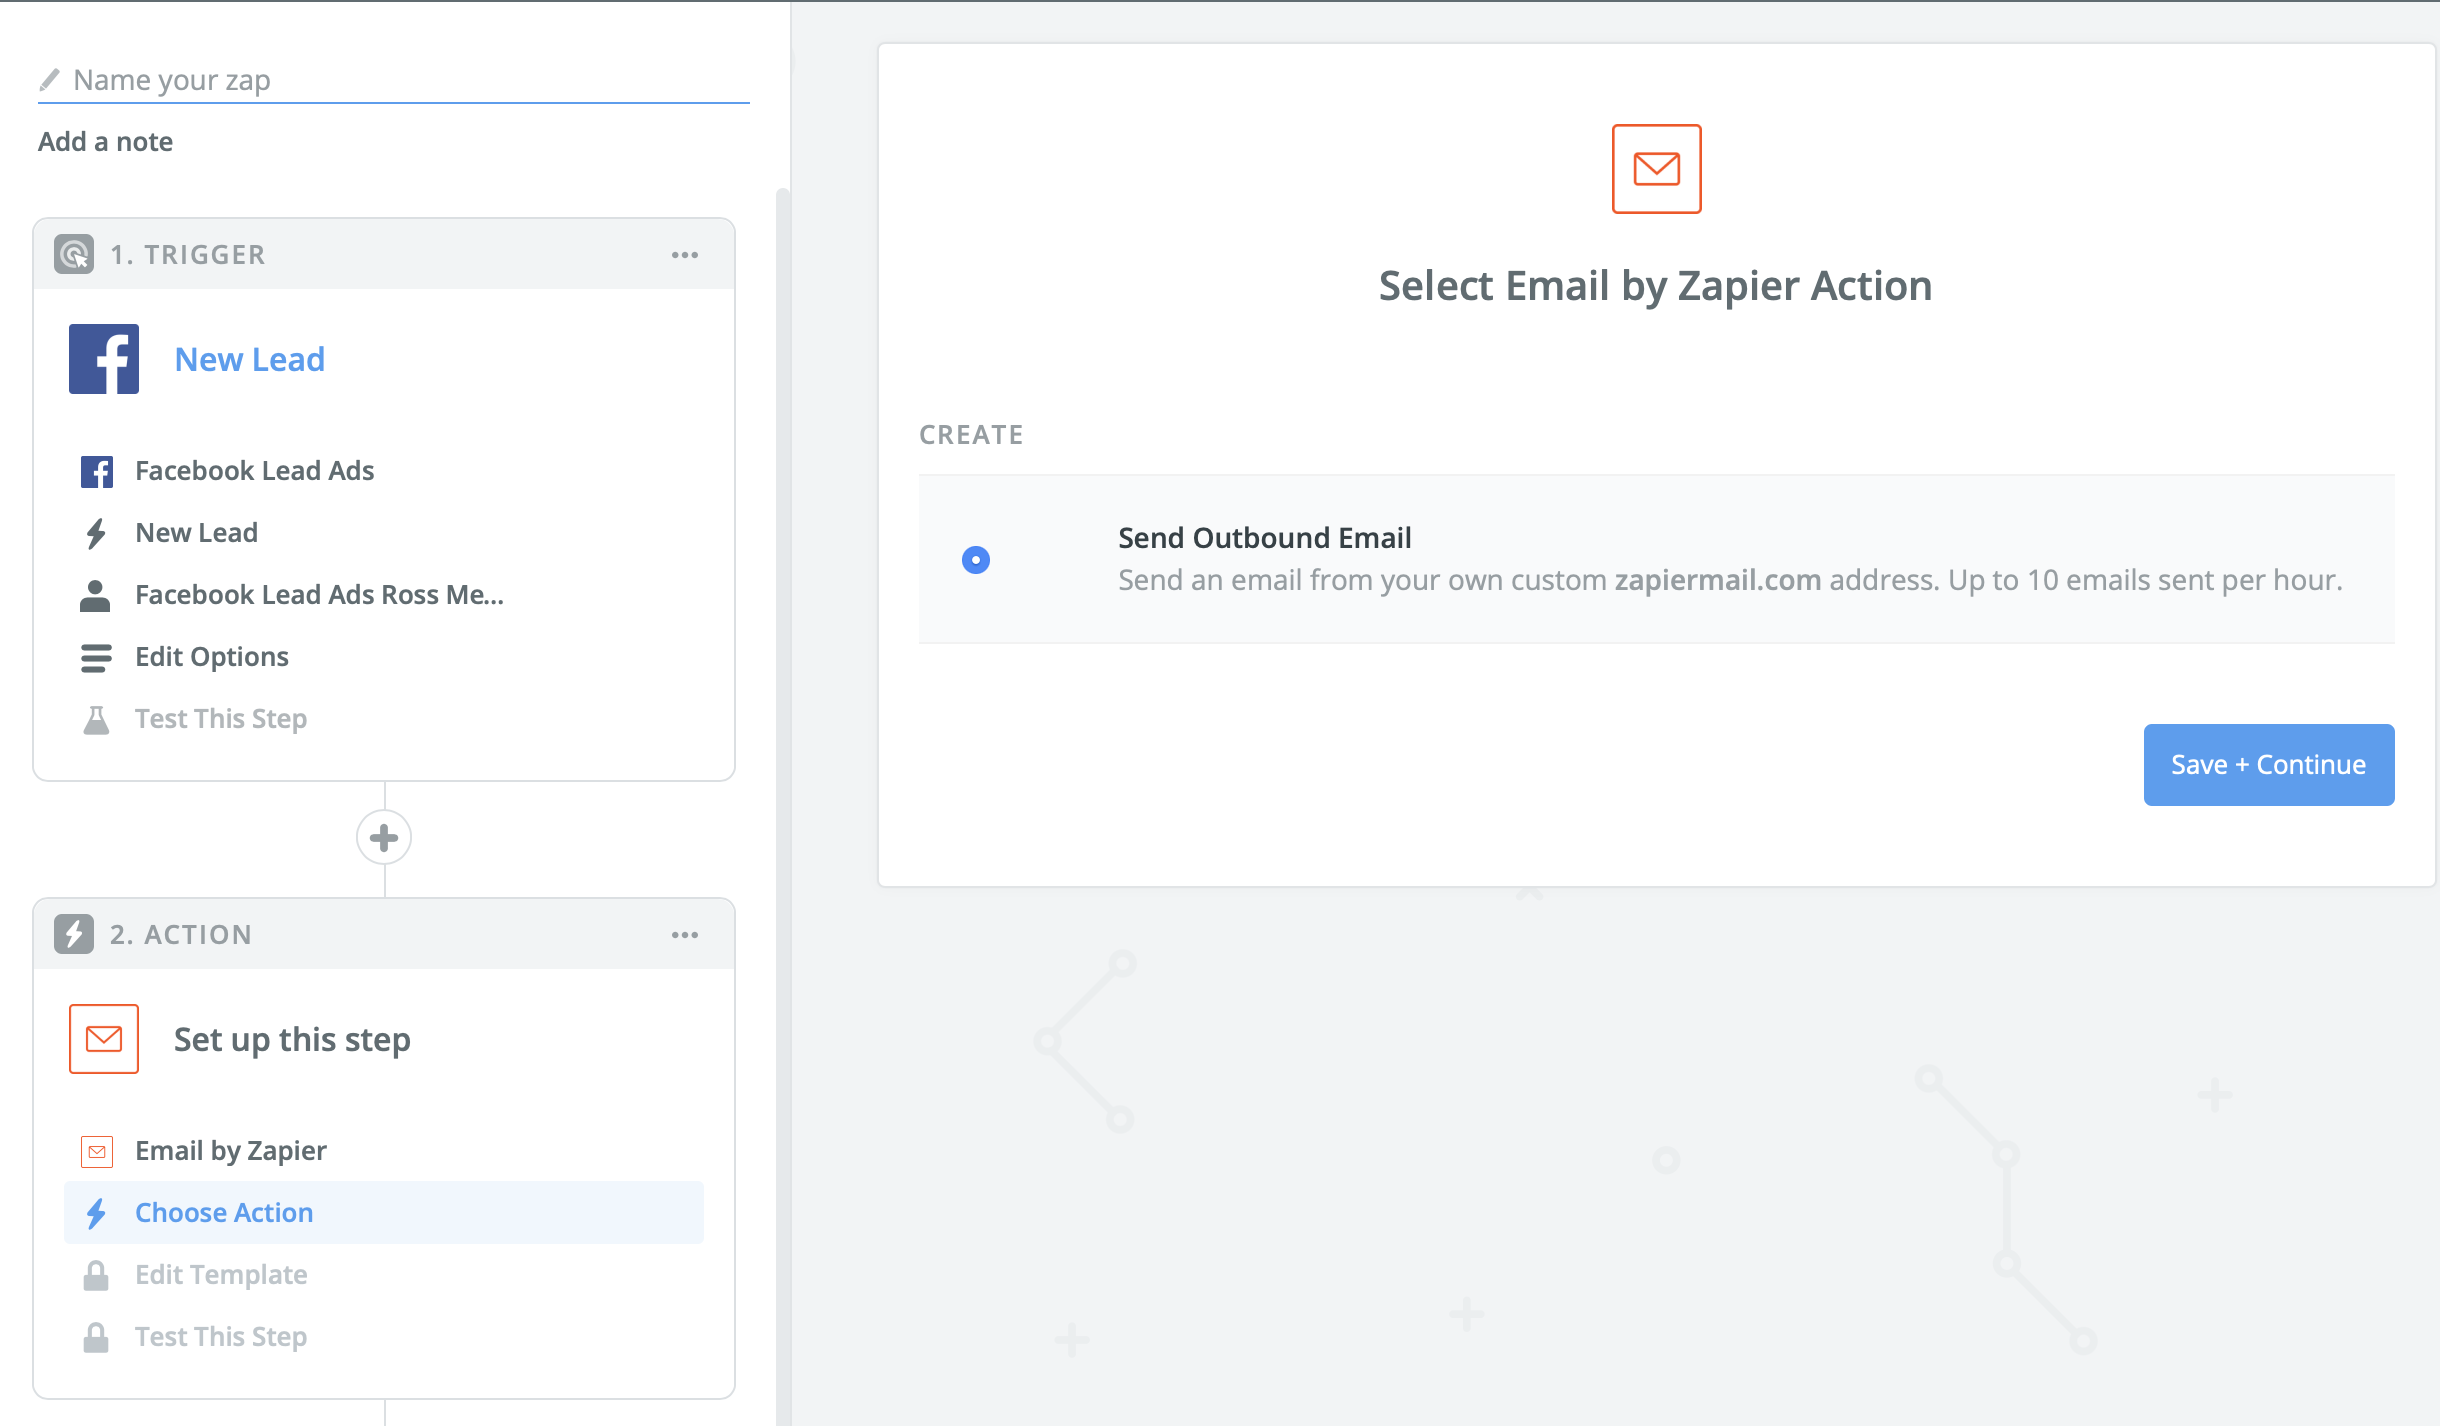 Email by Zapier for sending outbound email